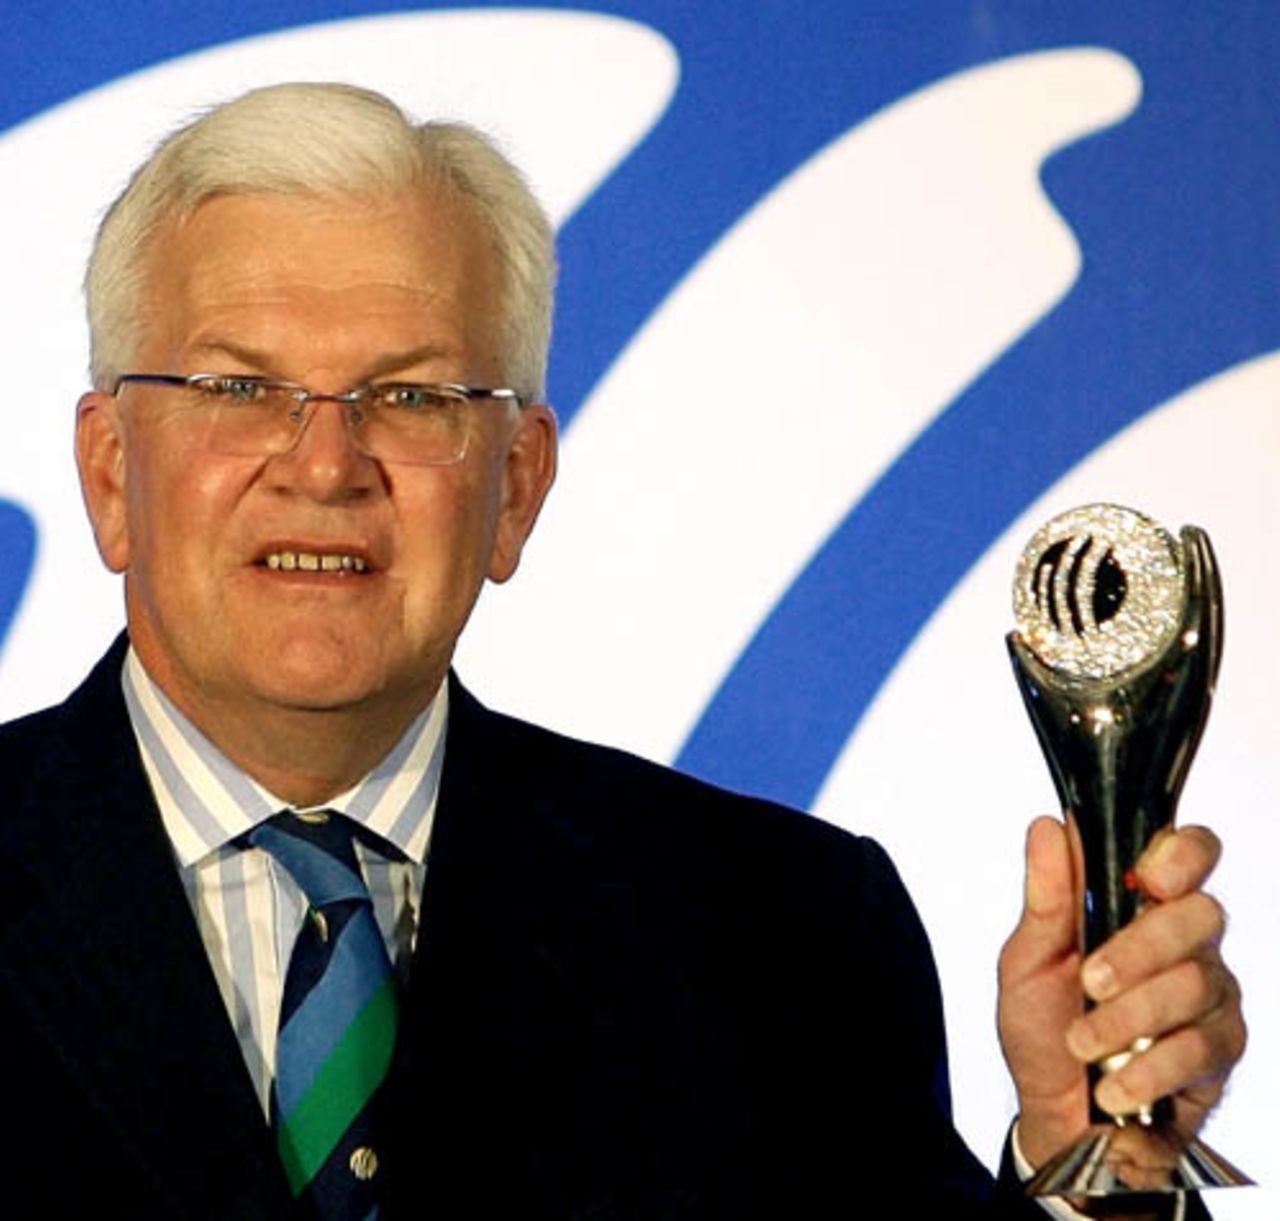 Malcolm Speed poses with a replica of the 2007 ICC Awards trophy at a press conference, Mumbai, 28 August 2007